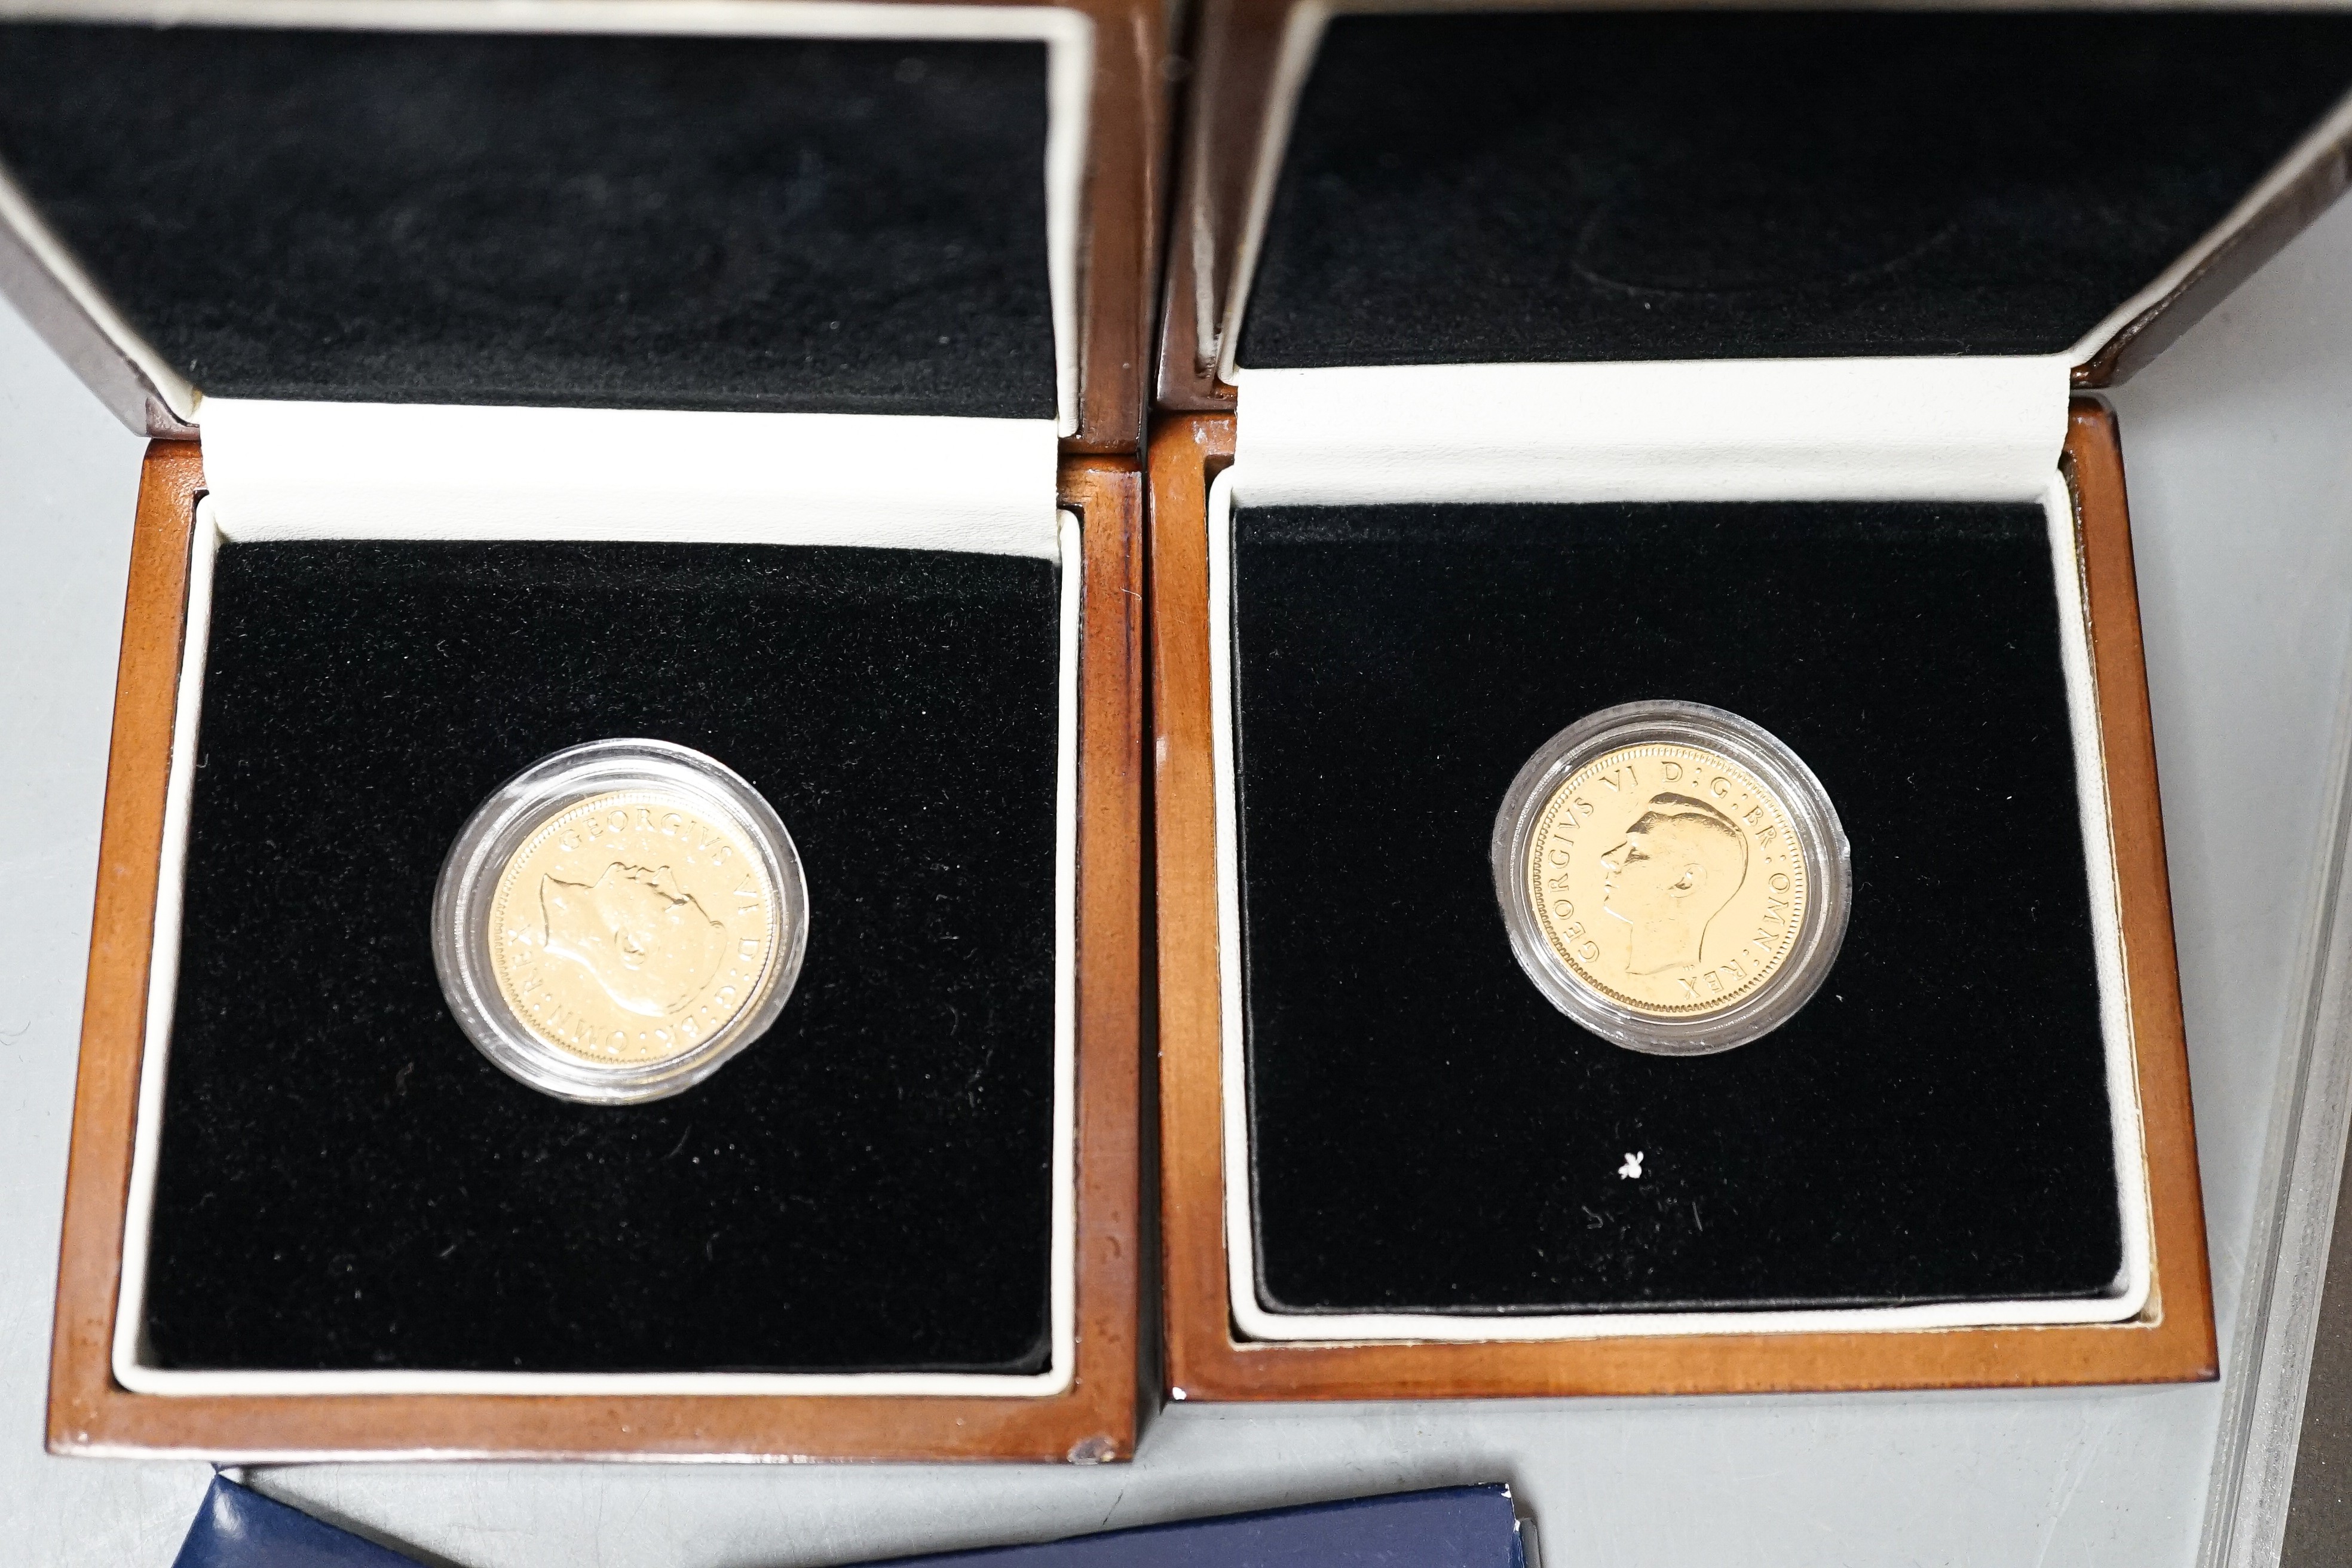 Two Royal Mint year sets 1970 & 1971 various London mint commemorative coins and later gold plated and enamelled coins (qty)